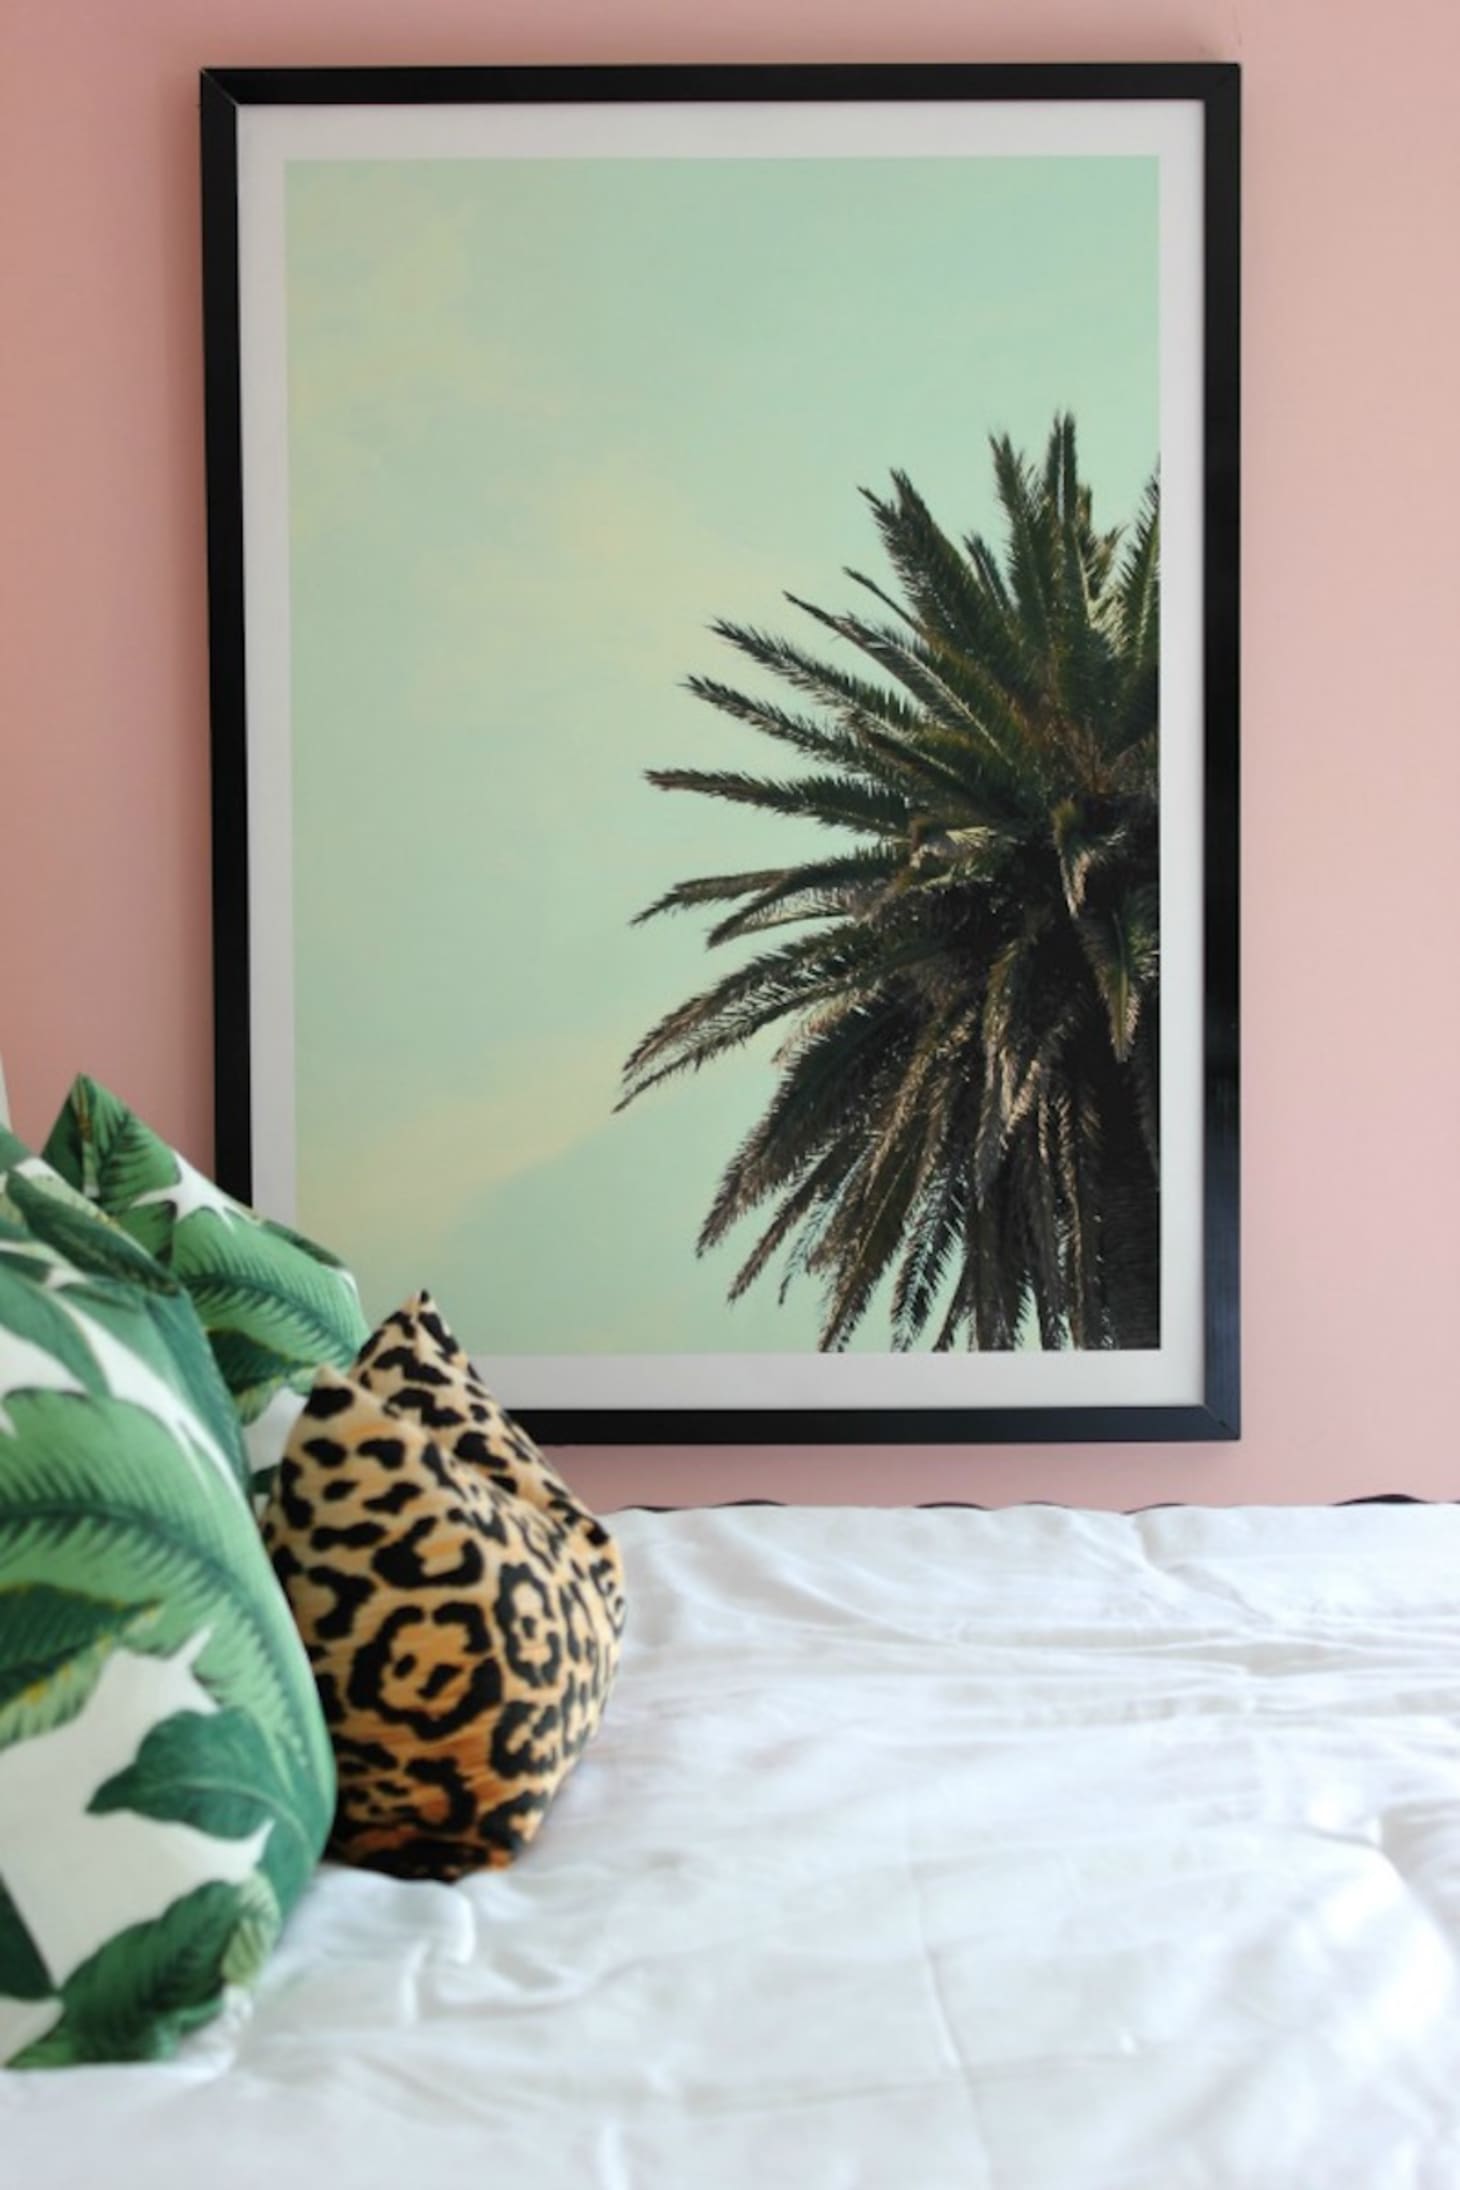 Large Picture Frames You Can Make on the Cheap | Apartment Therapy